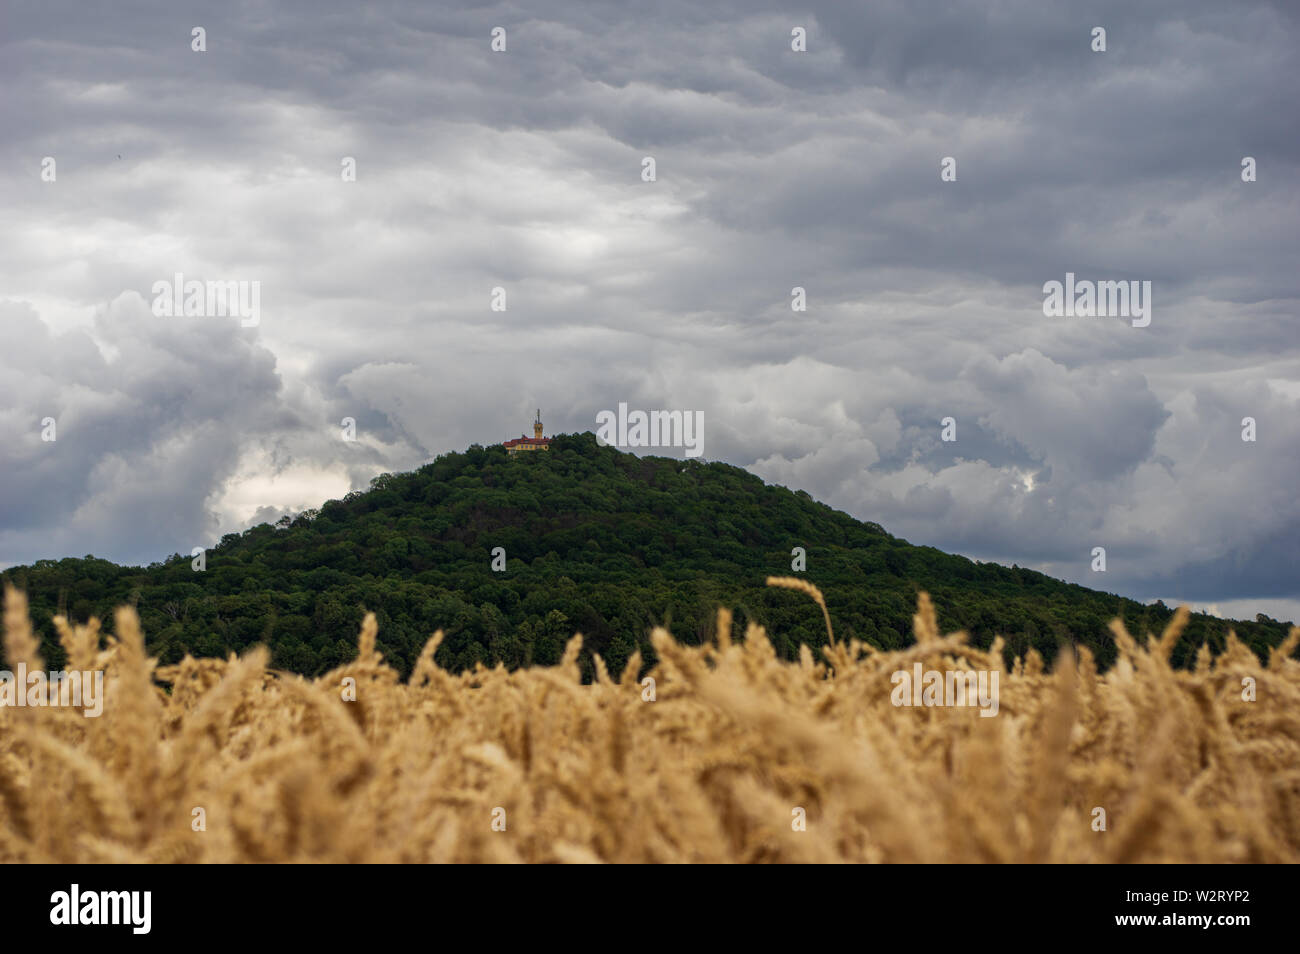 Landeskrone mountain in Görlitz Saxony / Germany behind ripe wheat field in front of  dramatic storm cloudy sky Stock Photo